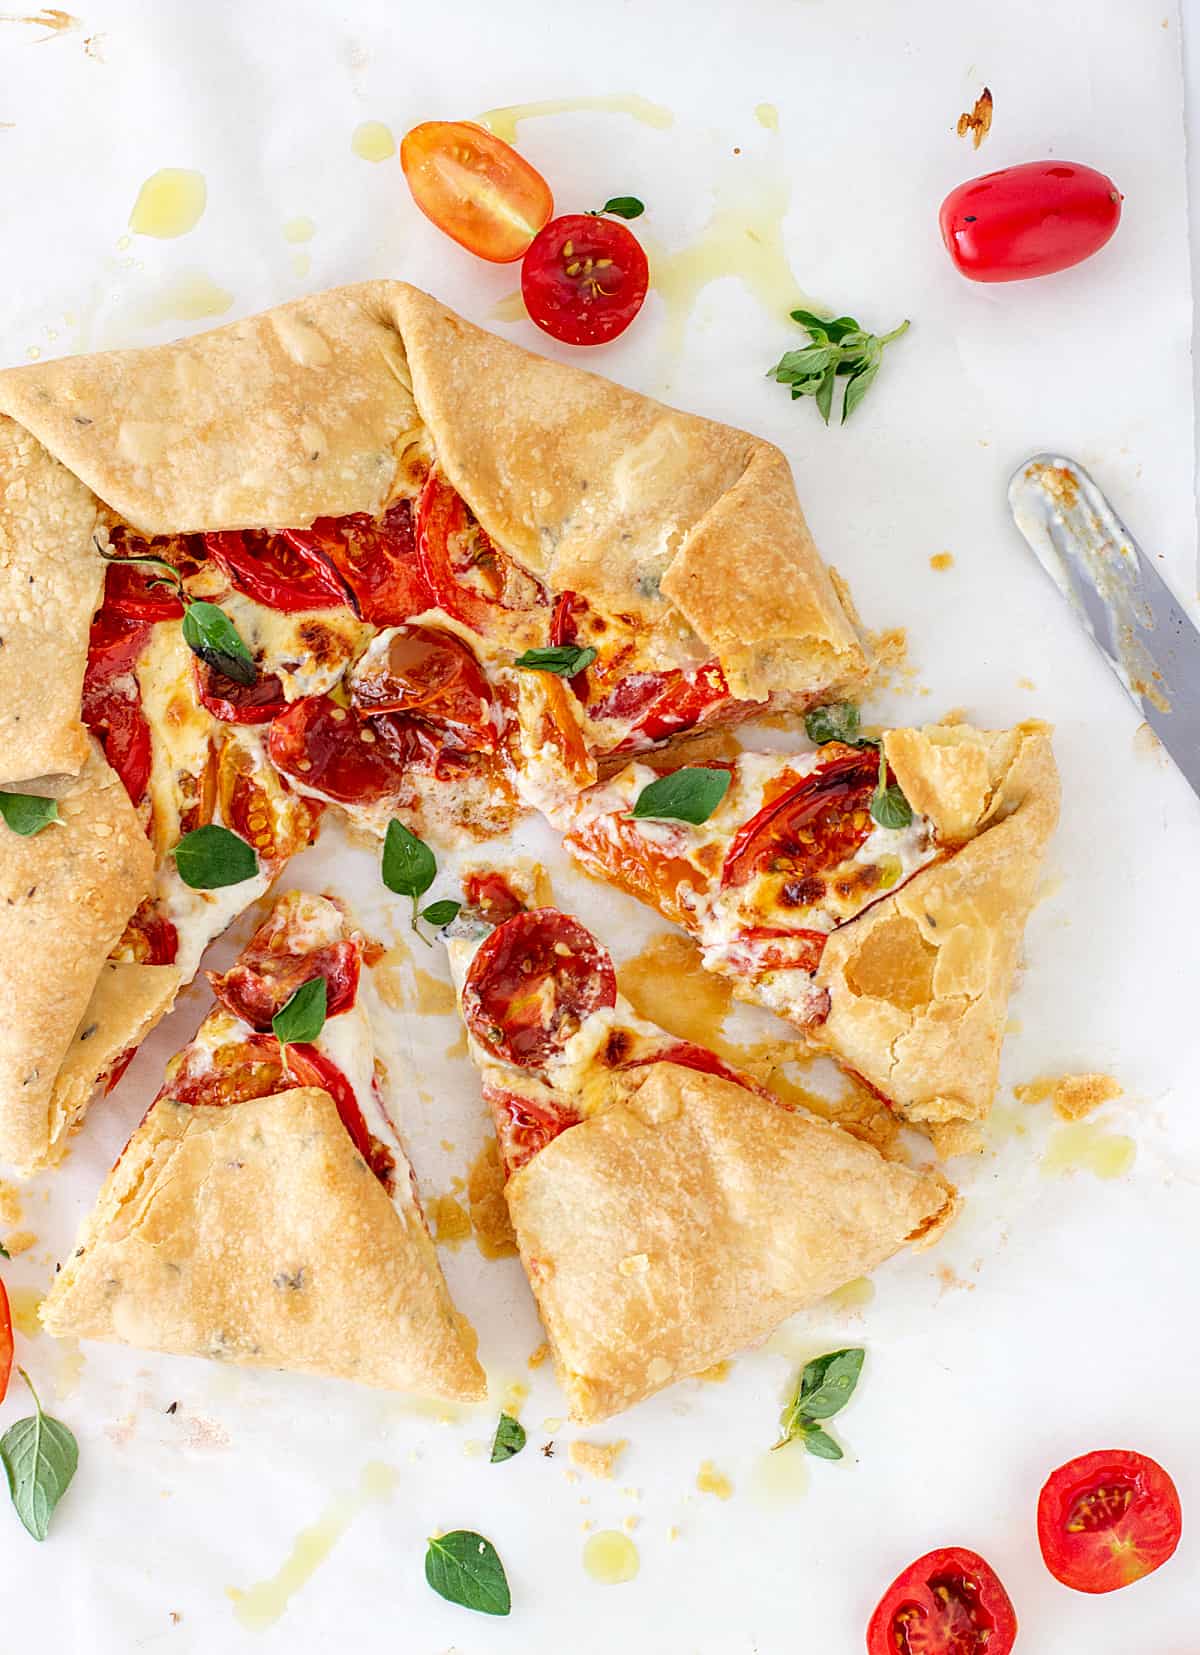 Slices and half piece of tomato galette on white surface, loose herbs